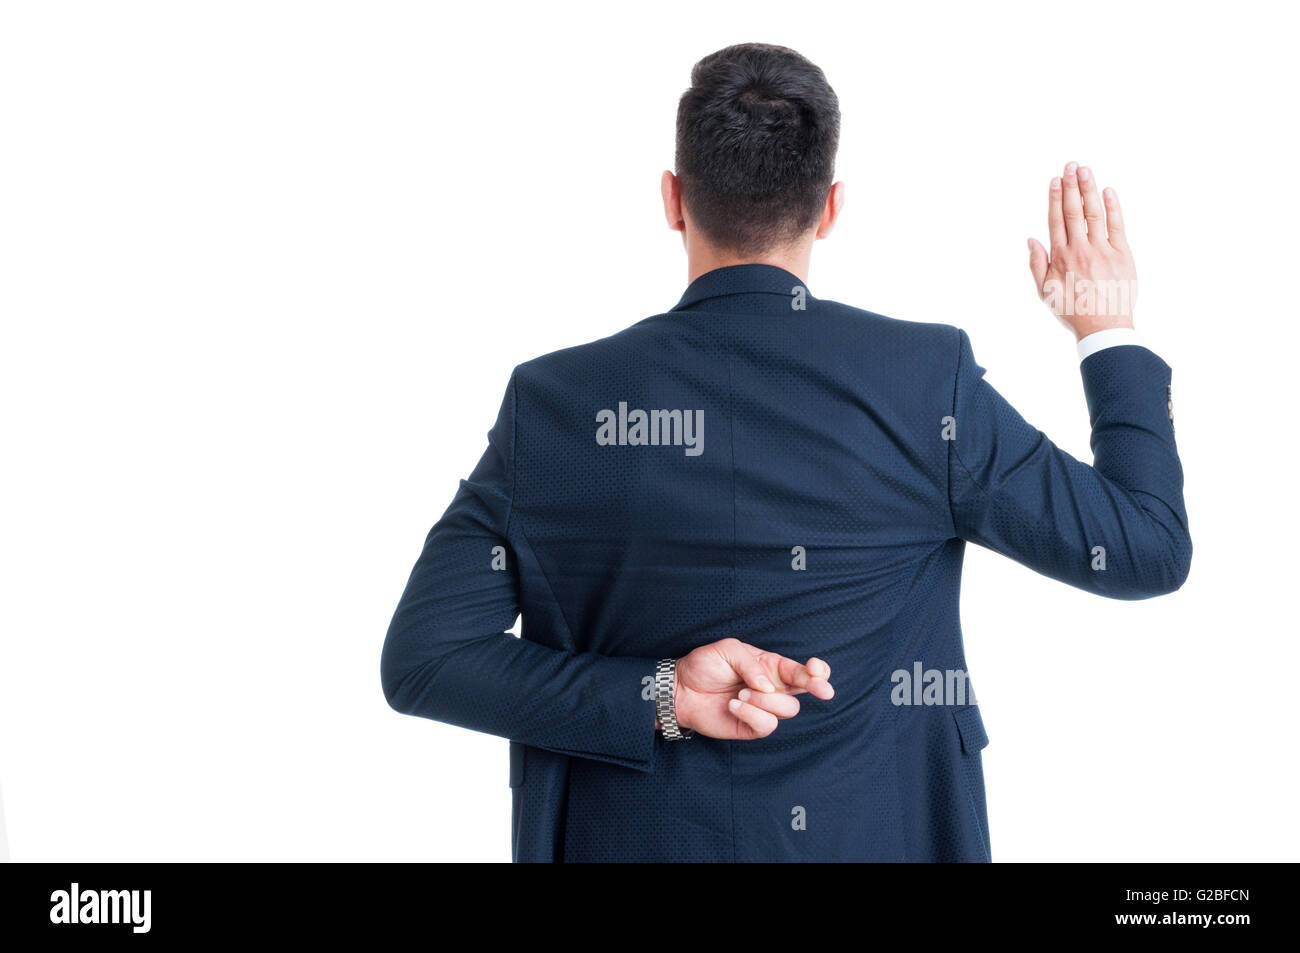 Dishonest lawyer making fake oath or pledge with fingers crossed behind back Stock Photo